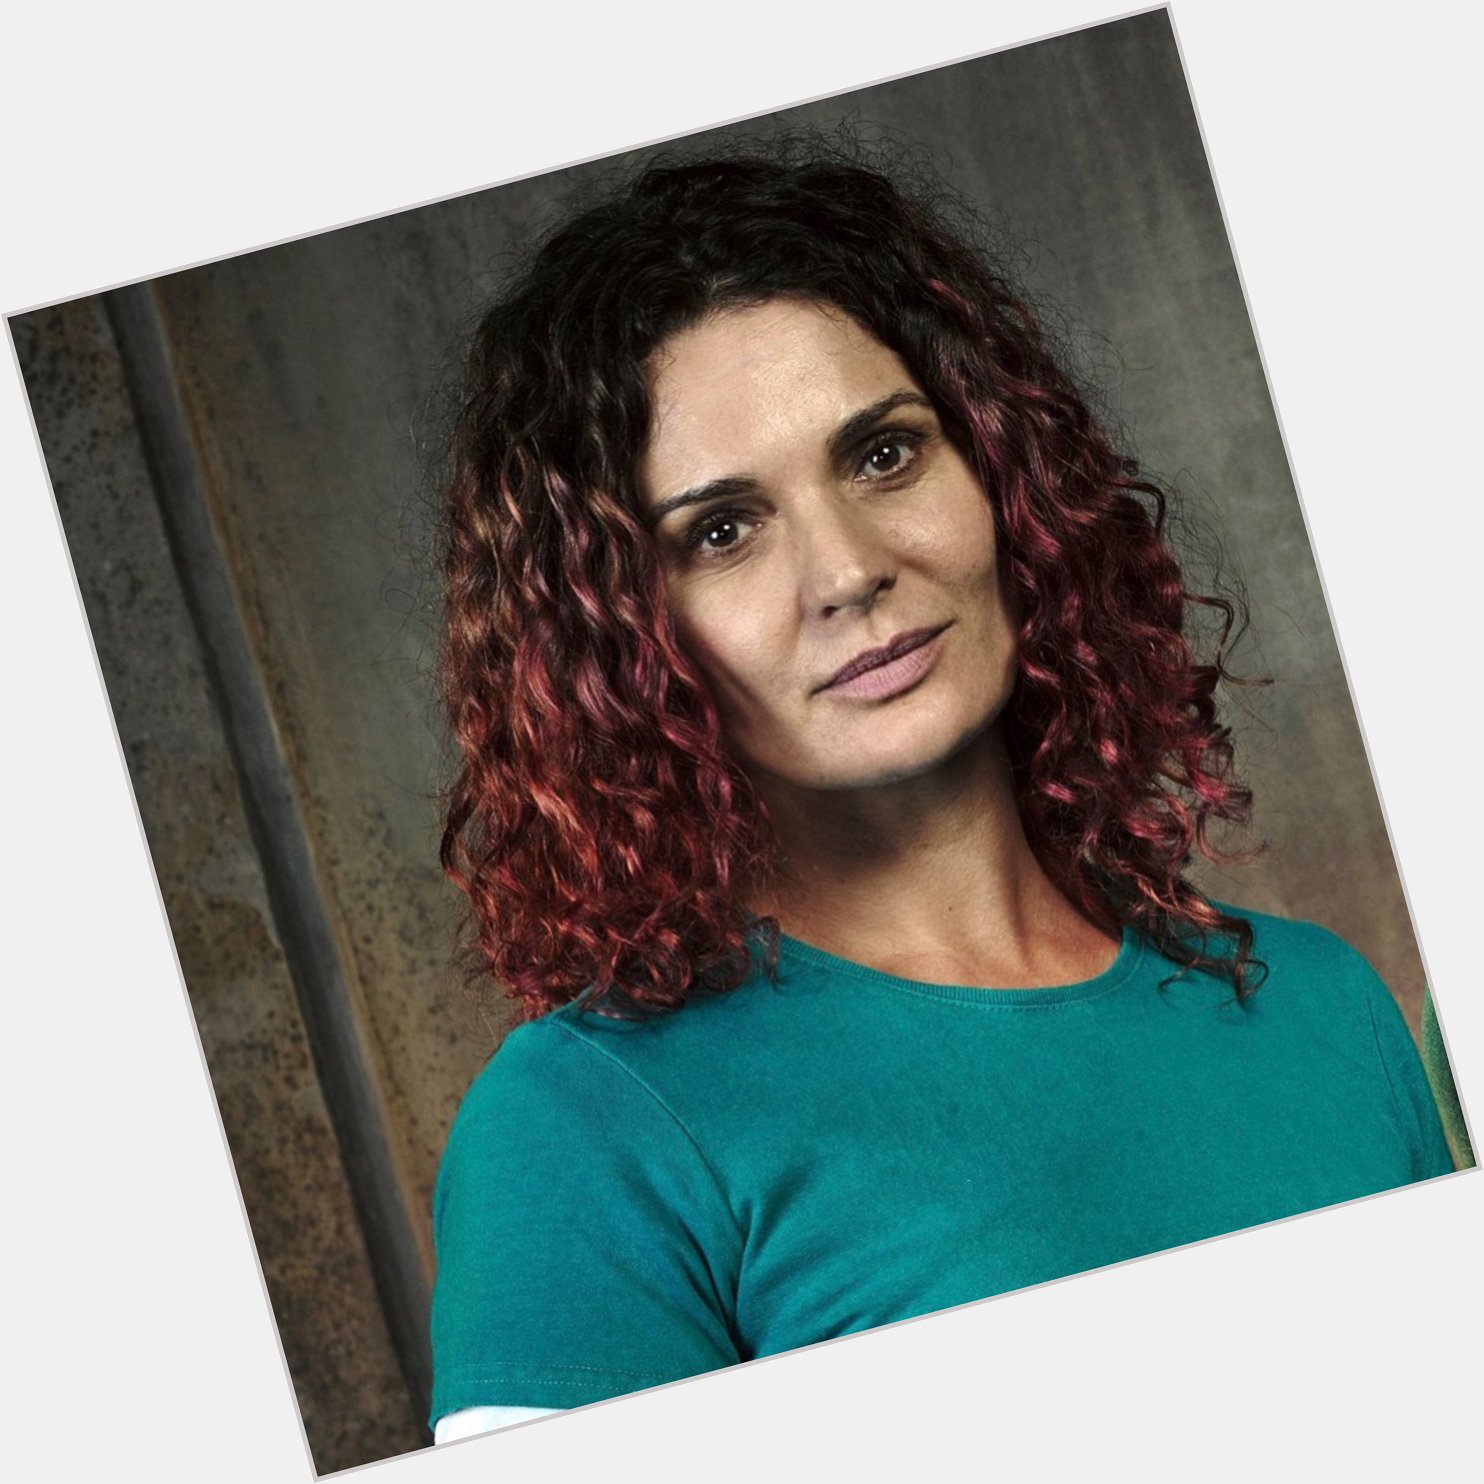 Happy Birthday to the amazing Danielle Cormack who turns 49 today!  